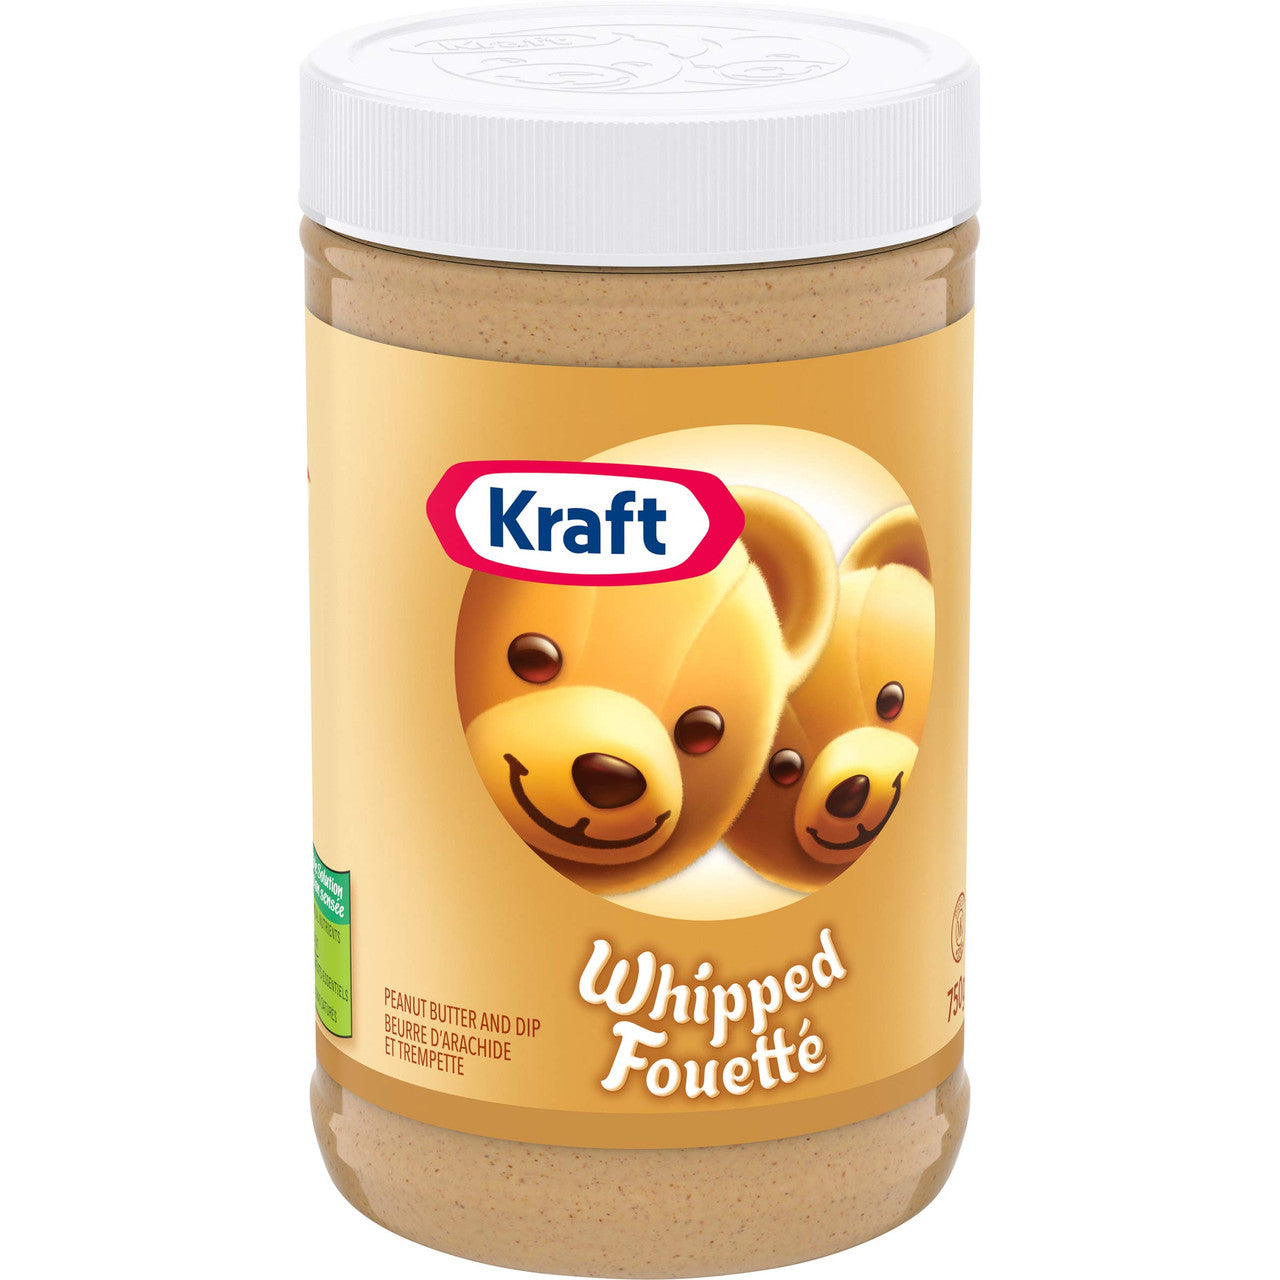 Kraft Peanut Butter (Whipped Peanut Butter, 750g/26.5 oz {Imported from Canada})